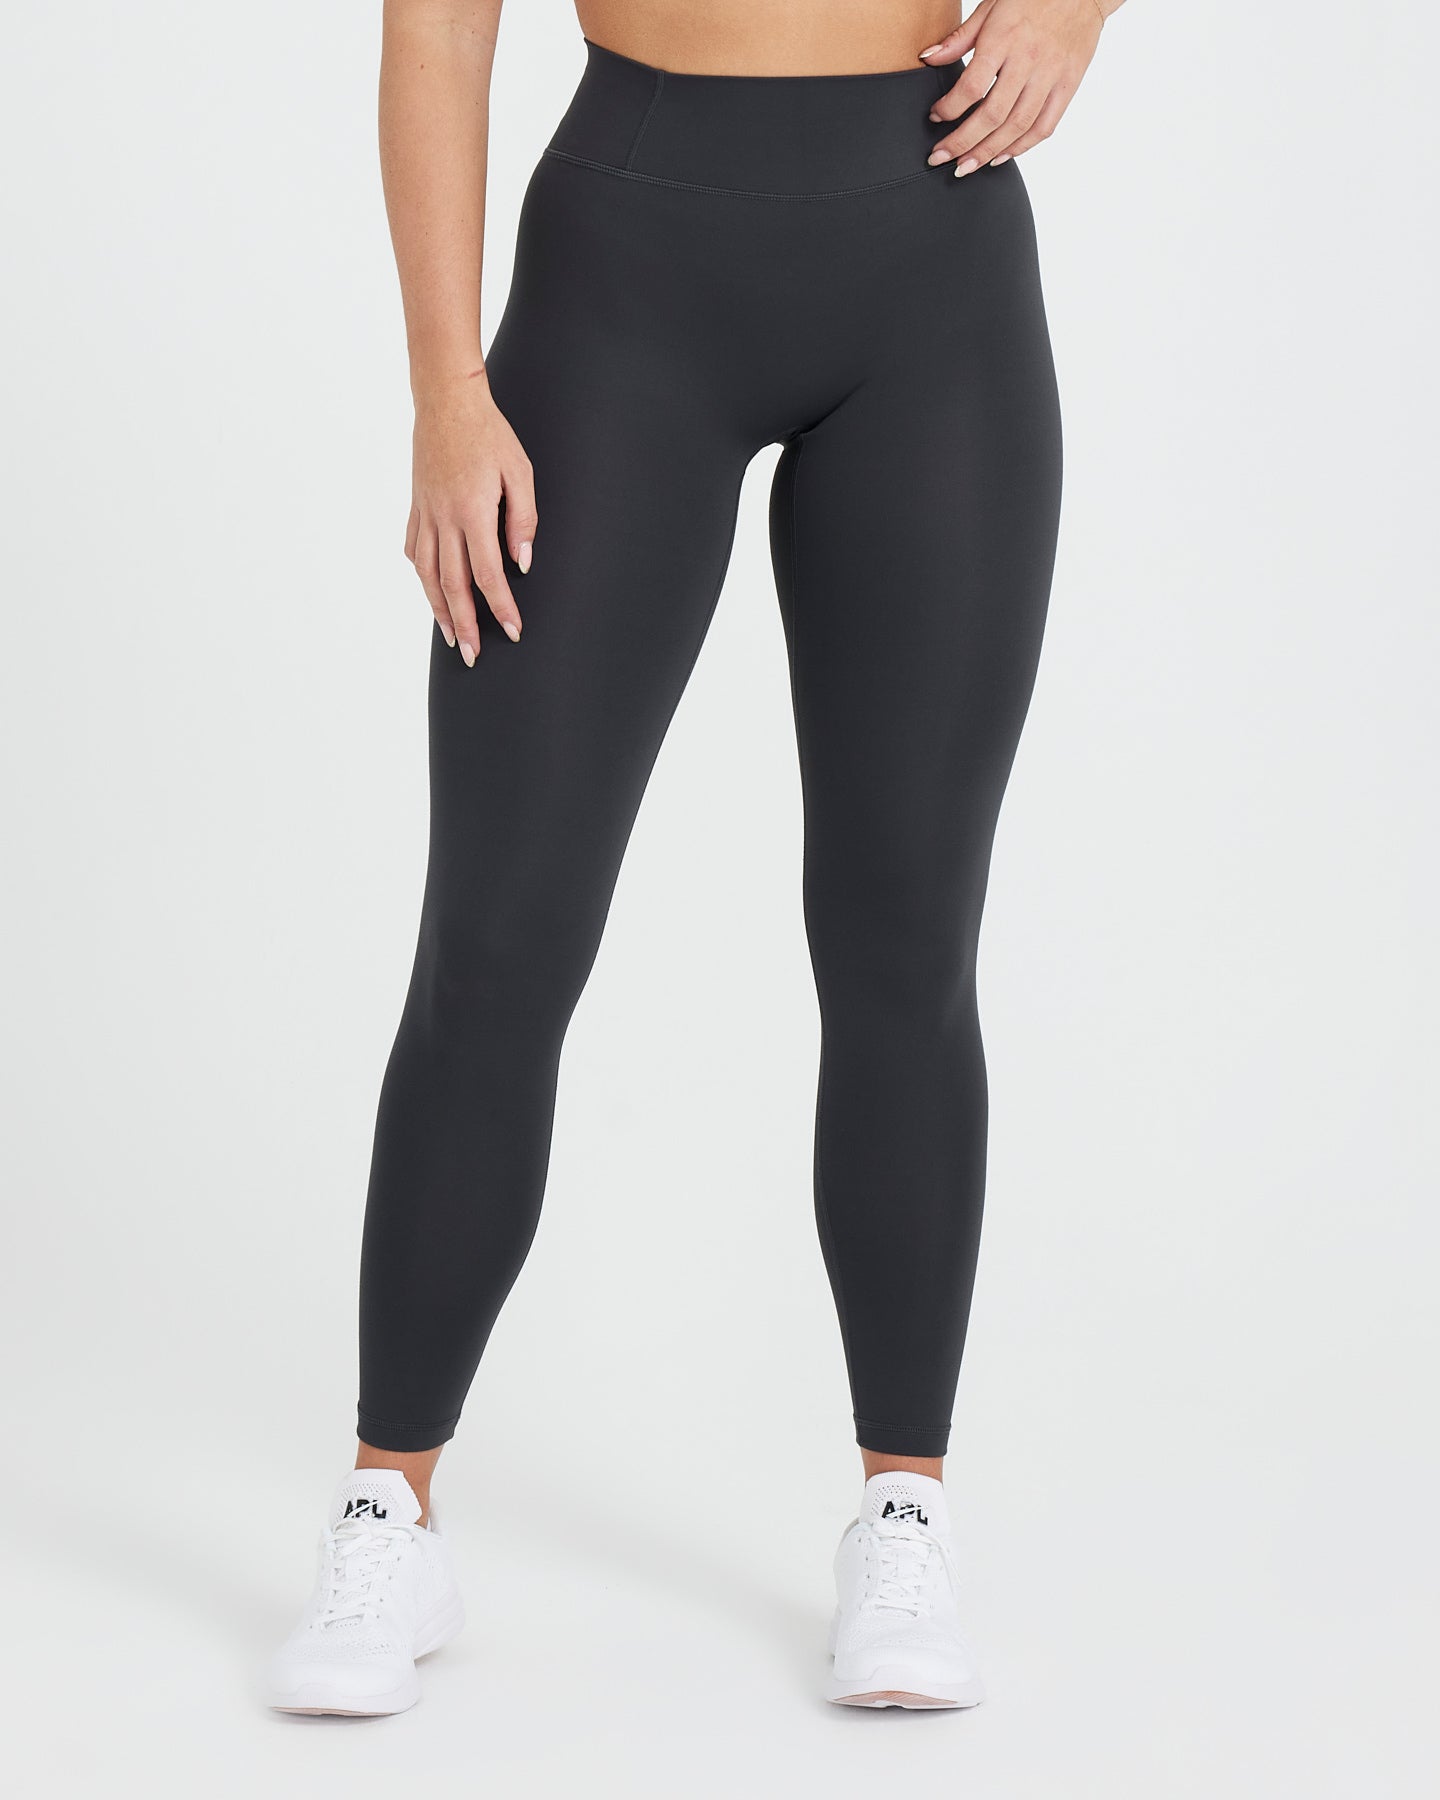 Coal Grey Leggings Women's - Available in Two Lengths | Oner Active US